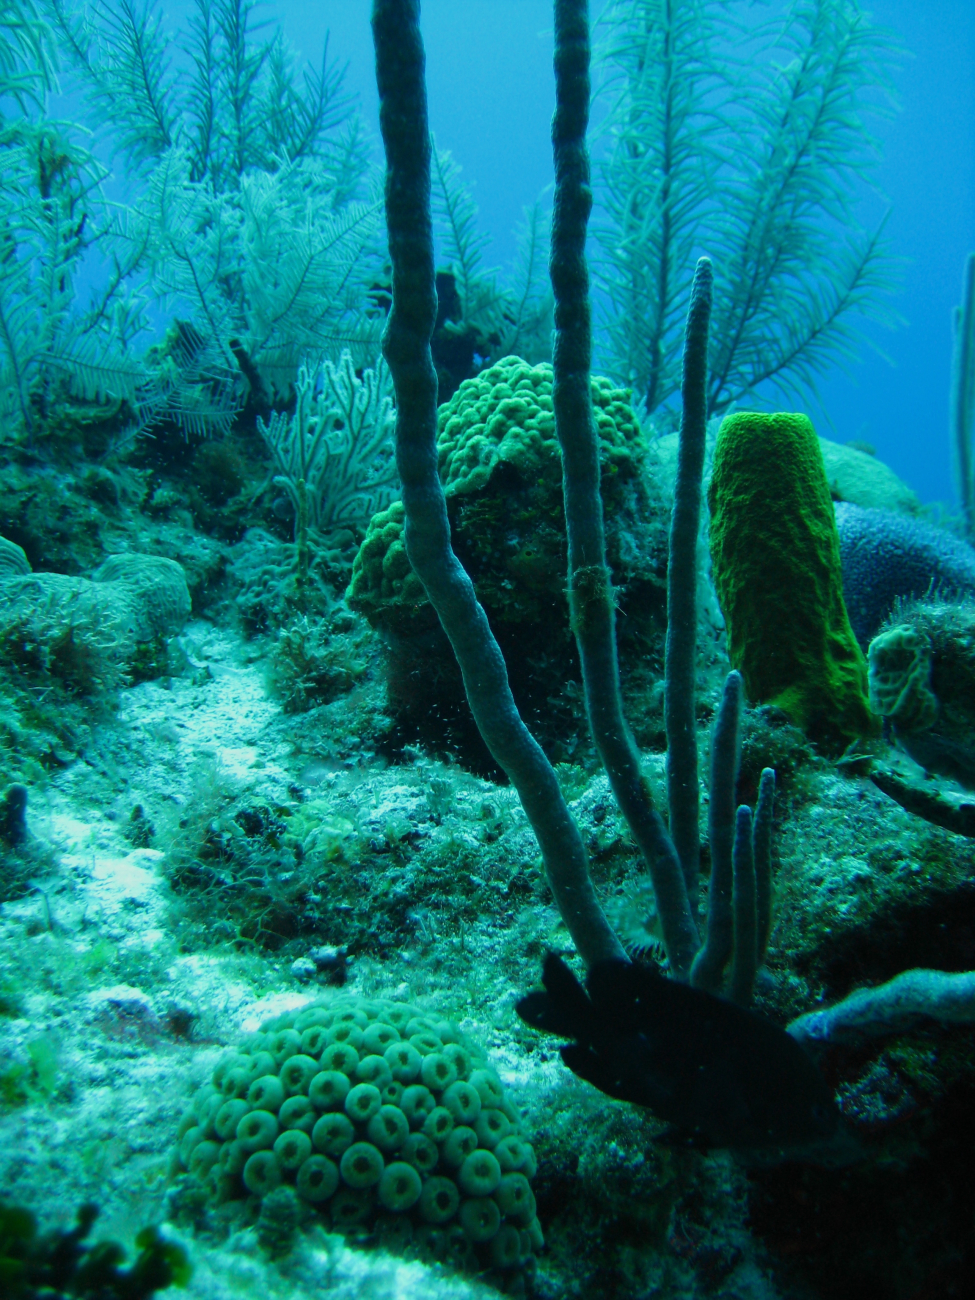 Reef scene with numerous coral and sponge species